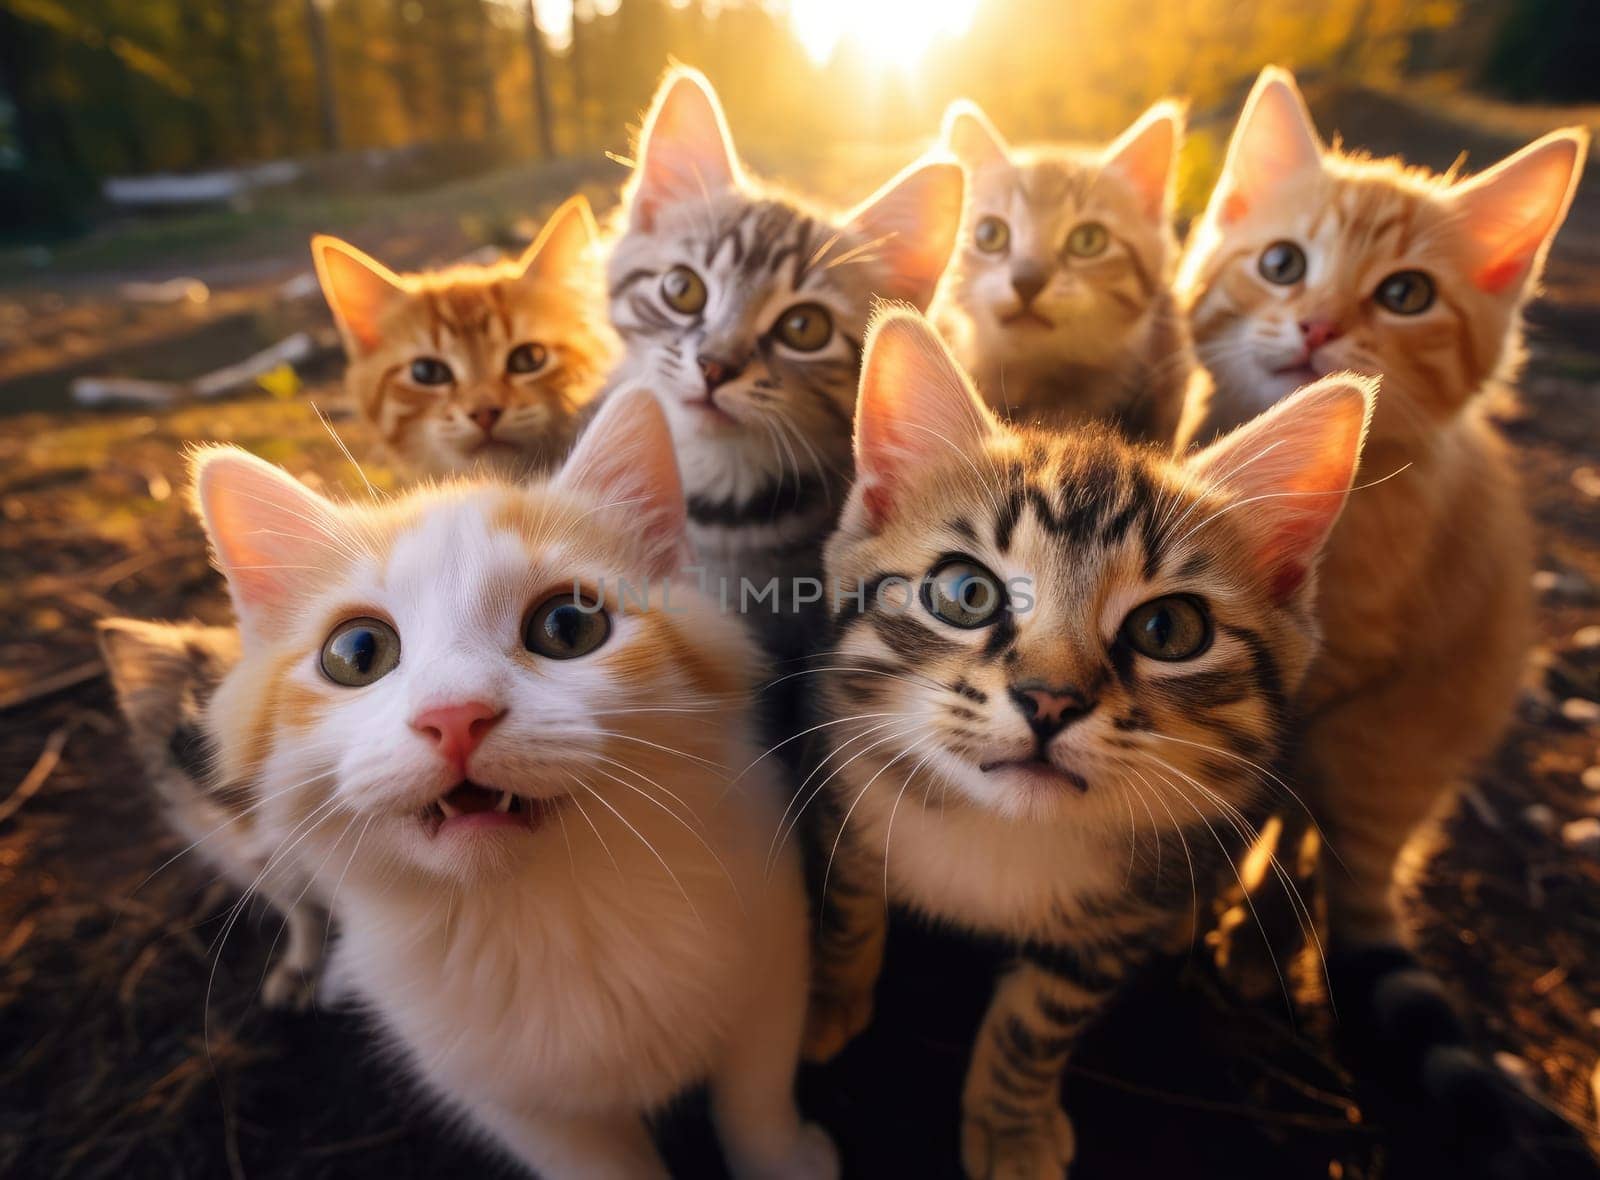 Several cats take a group selfie. Everyone is looking at the camera